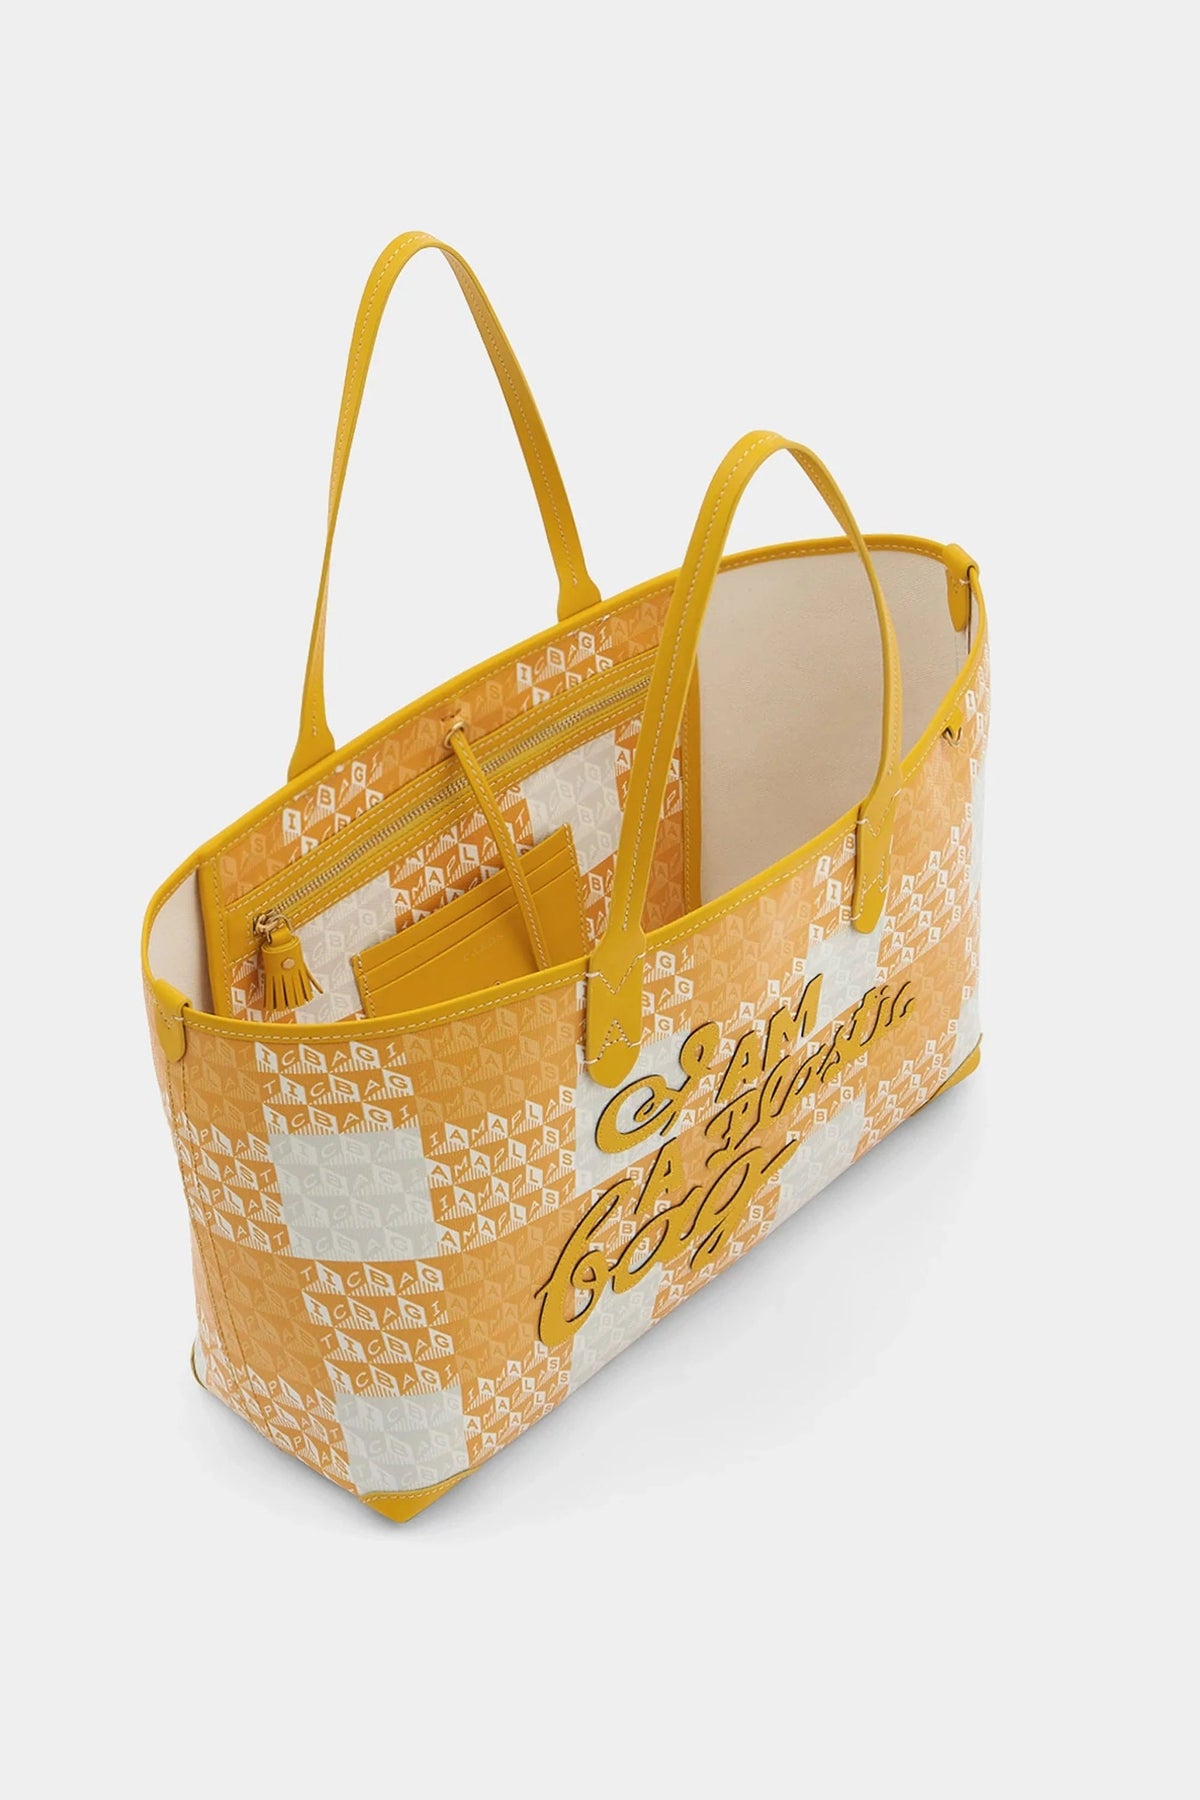 Anya Hindmarch Large &#39;I Am A Plastic Bag&#39; Motif Tote in Honey Gingham